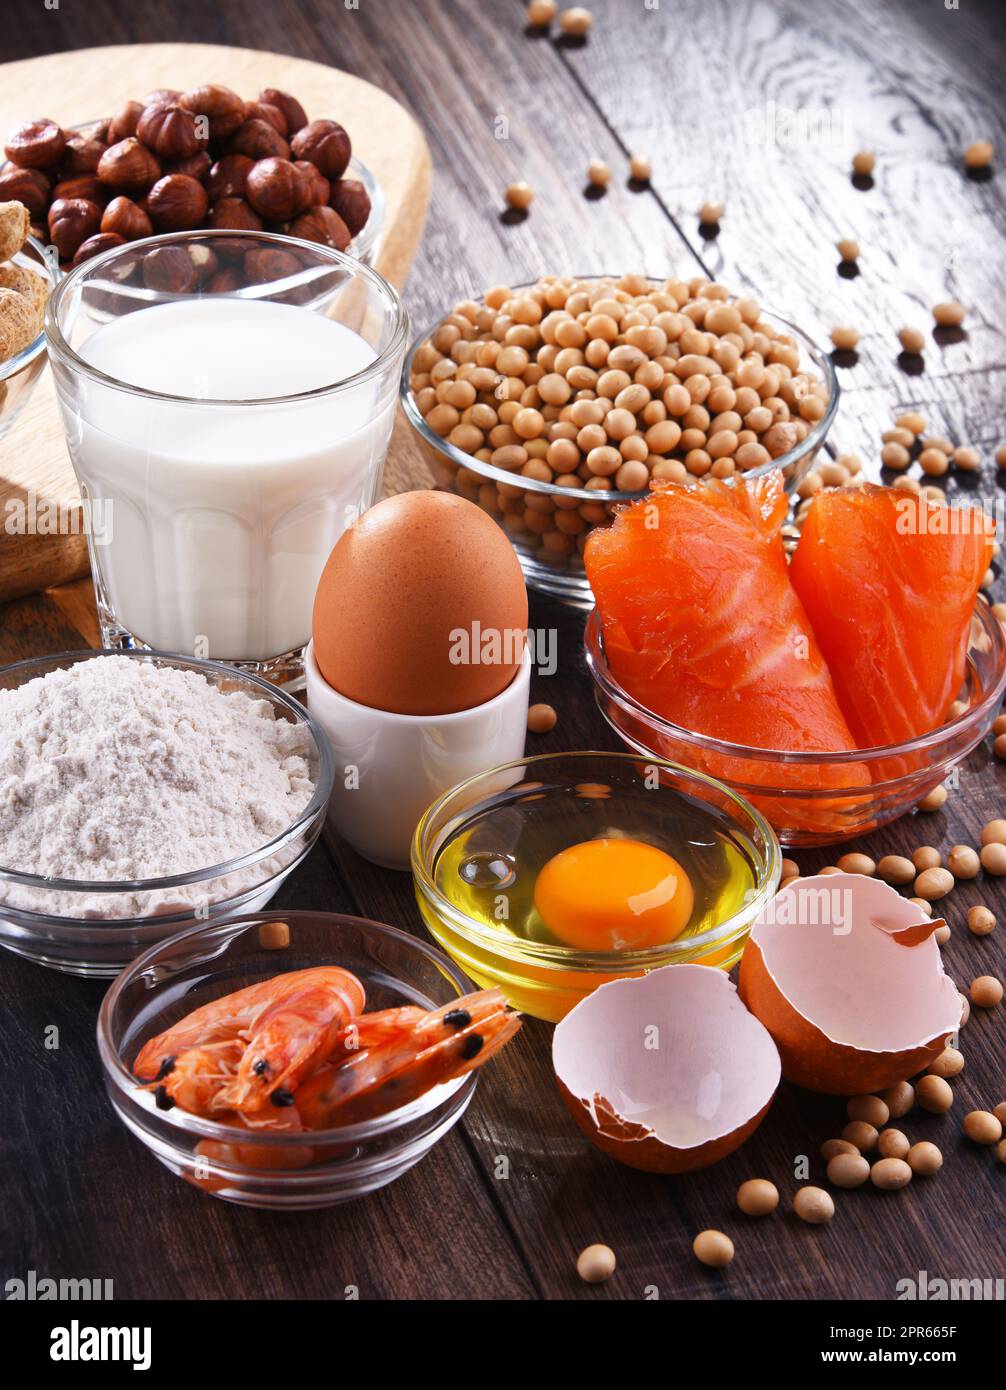 Composition with common food allergens Stock Photo